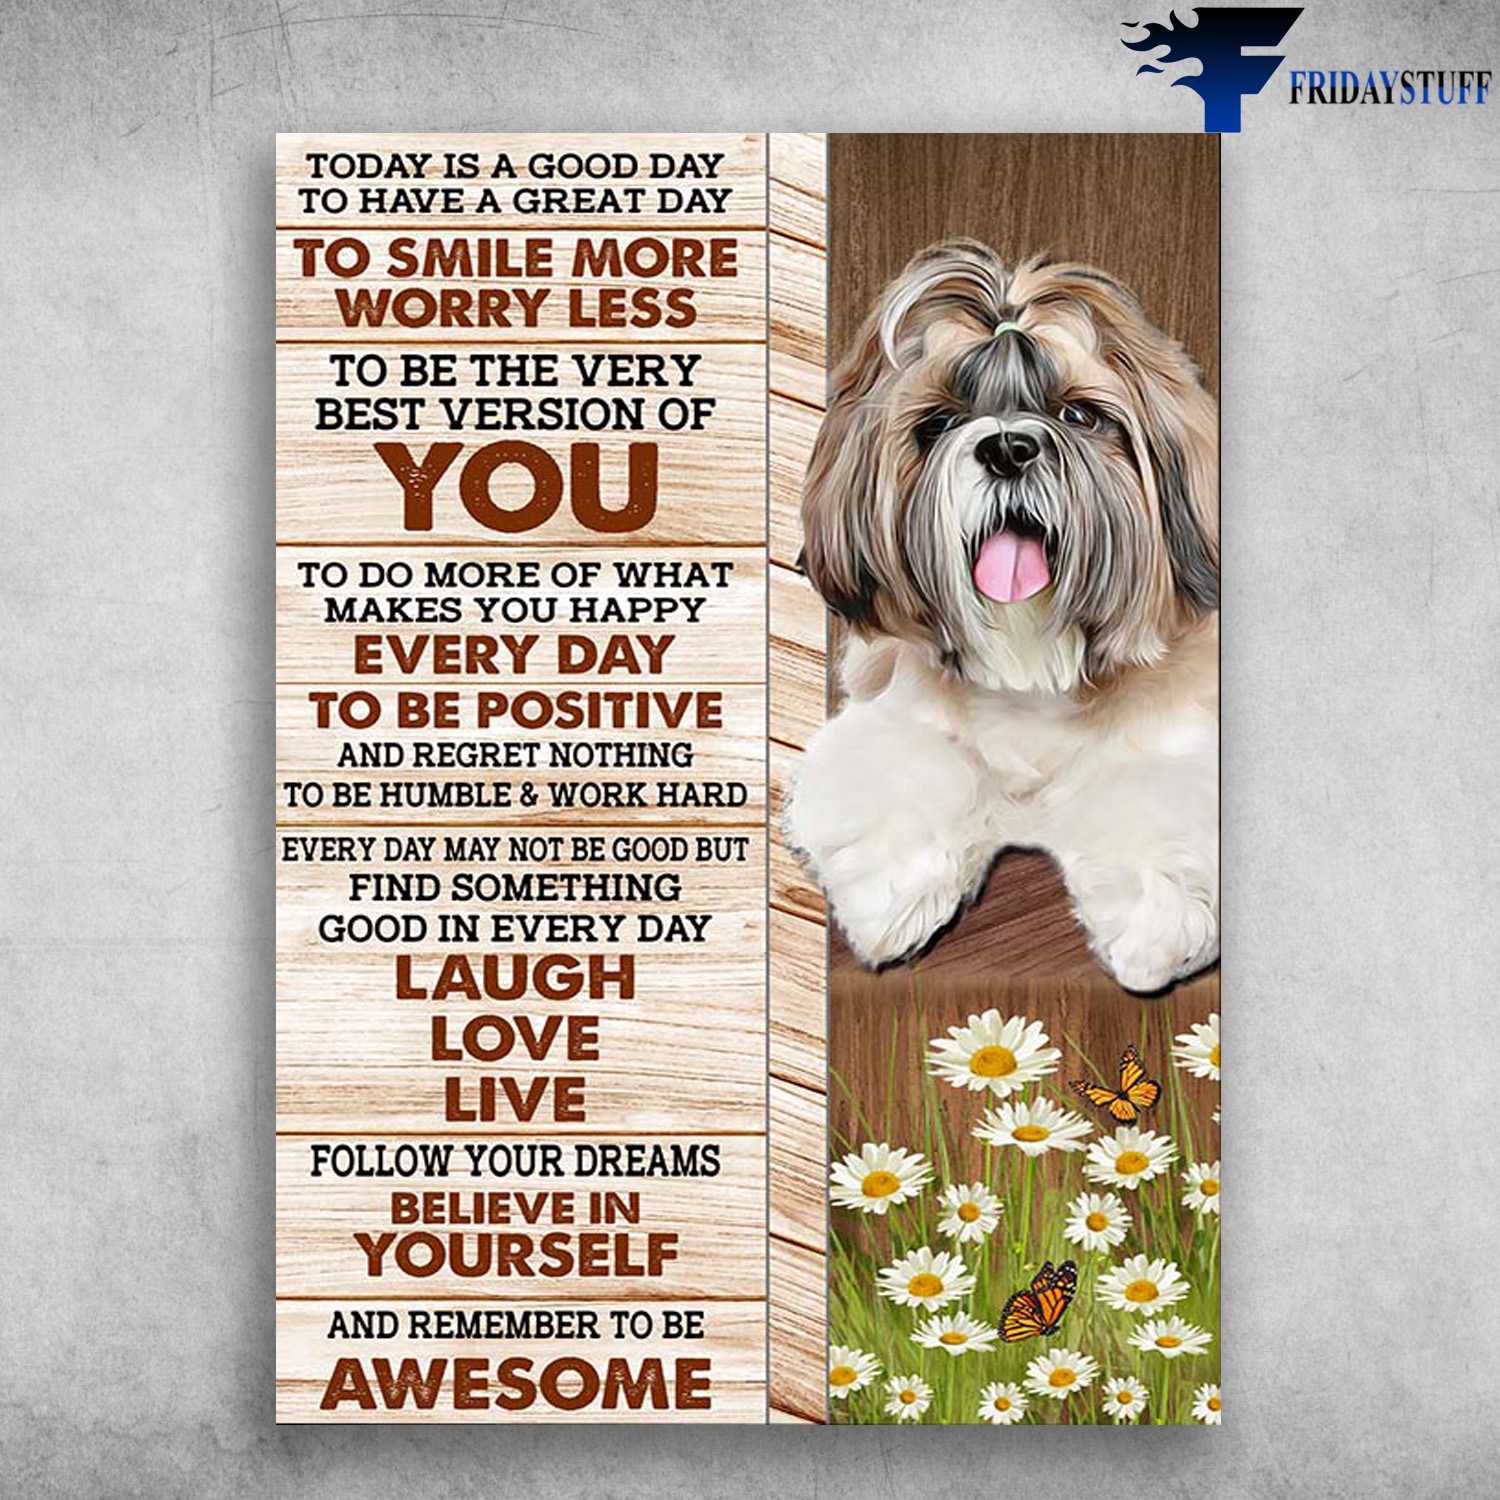 Shih Tzu Dog - Today I A Good Day, To Have A Great Day, To Smile Less, To Be The Very Best Version Of You, To Do More Of What, Makes You Happy, Every Day To Be Postive